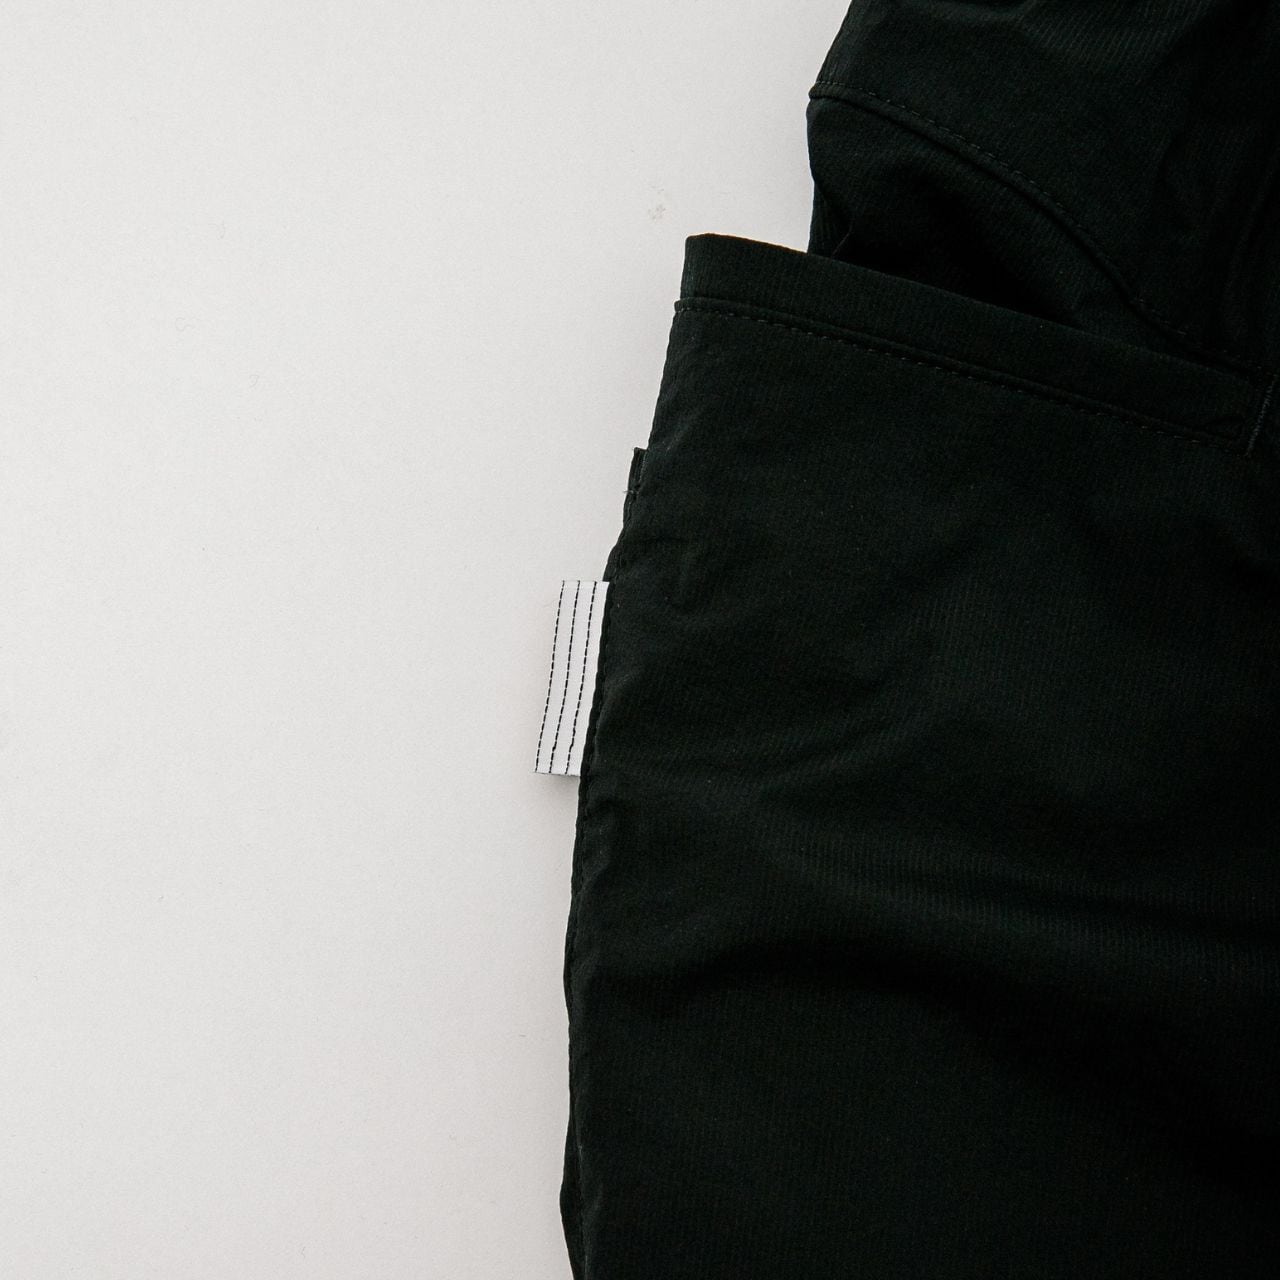 YGM×SEE SEE×S.F.C WIDE TAPERED EASY PANTS | Yes Good Market ONLINE